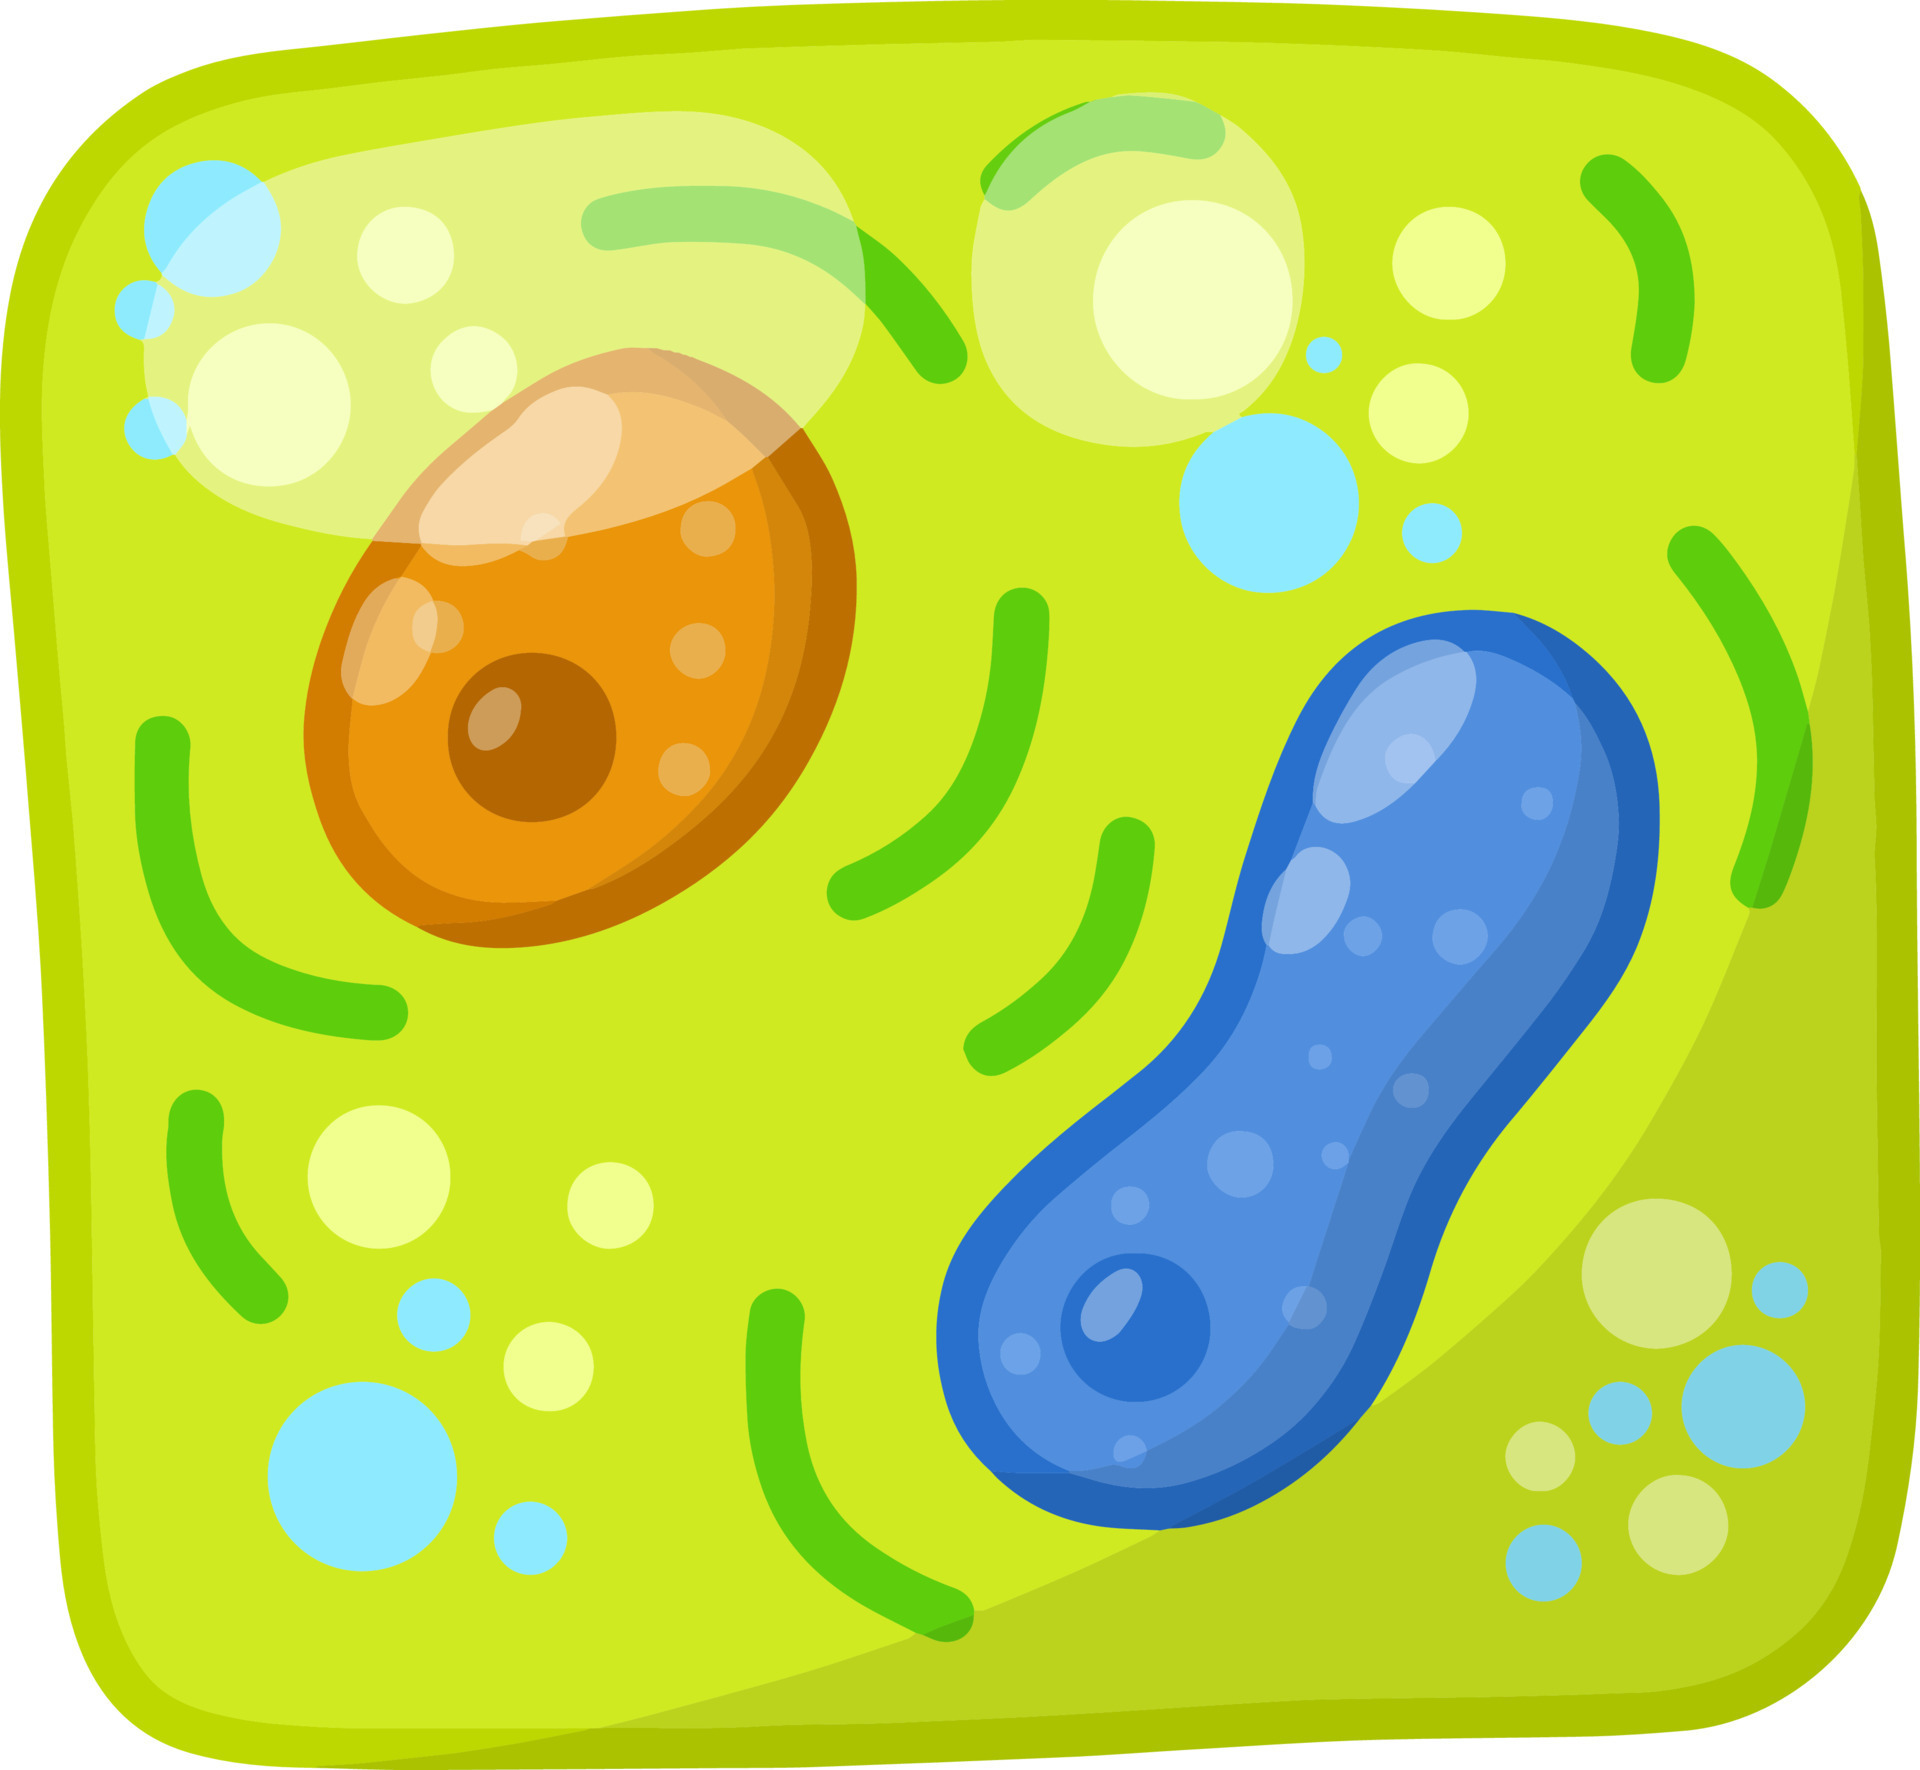 Green Cell Of The Plant Element Of Science And Biology Stock Illustration -  Download Image Now - iStock